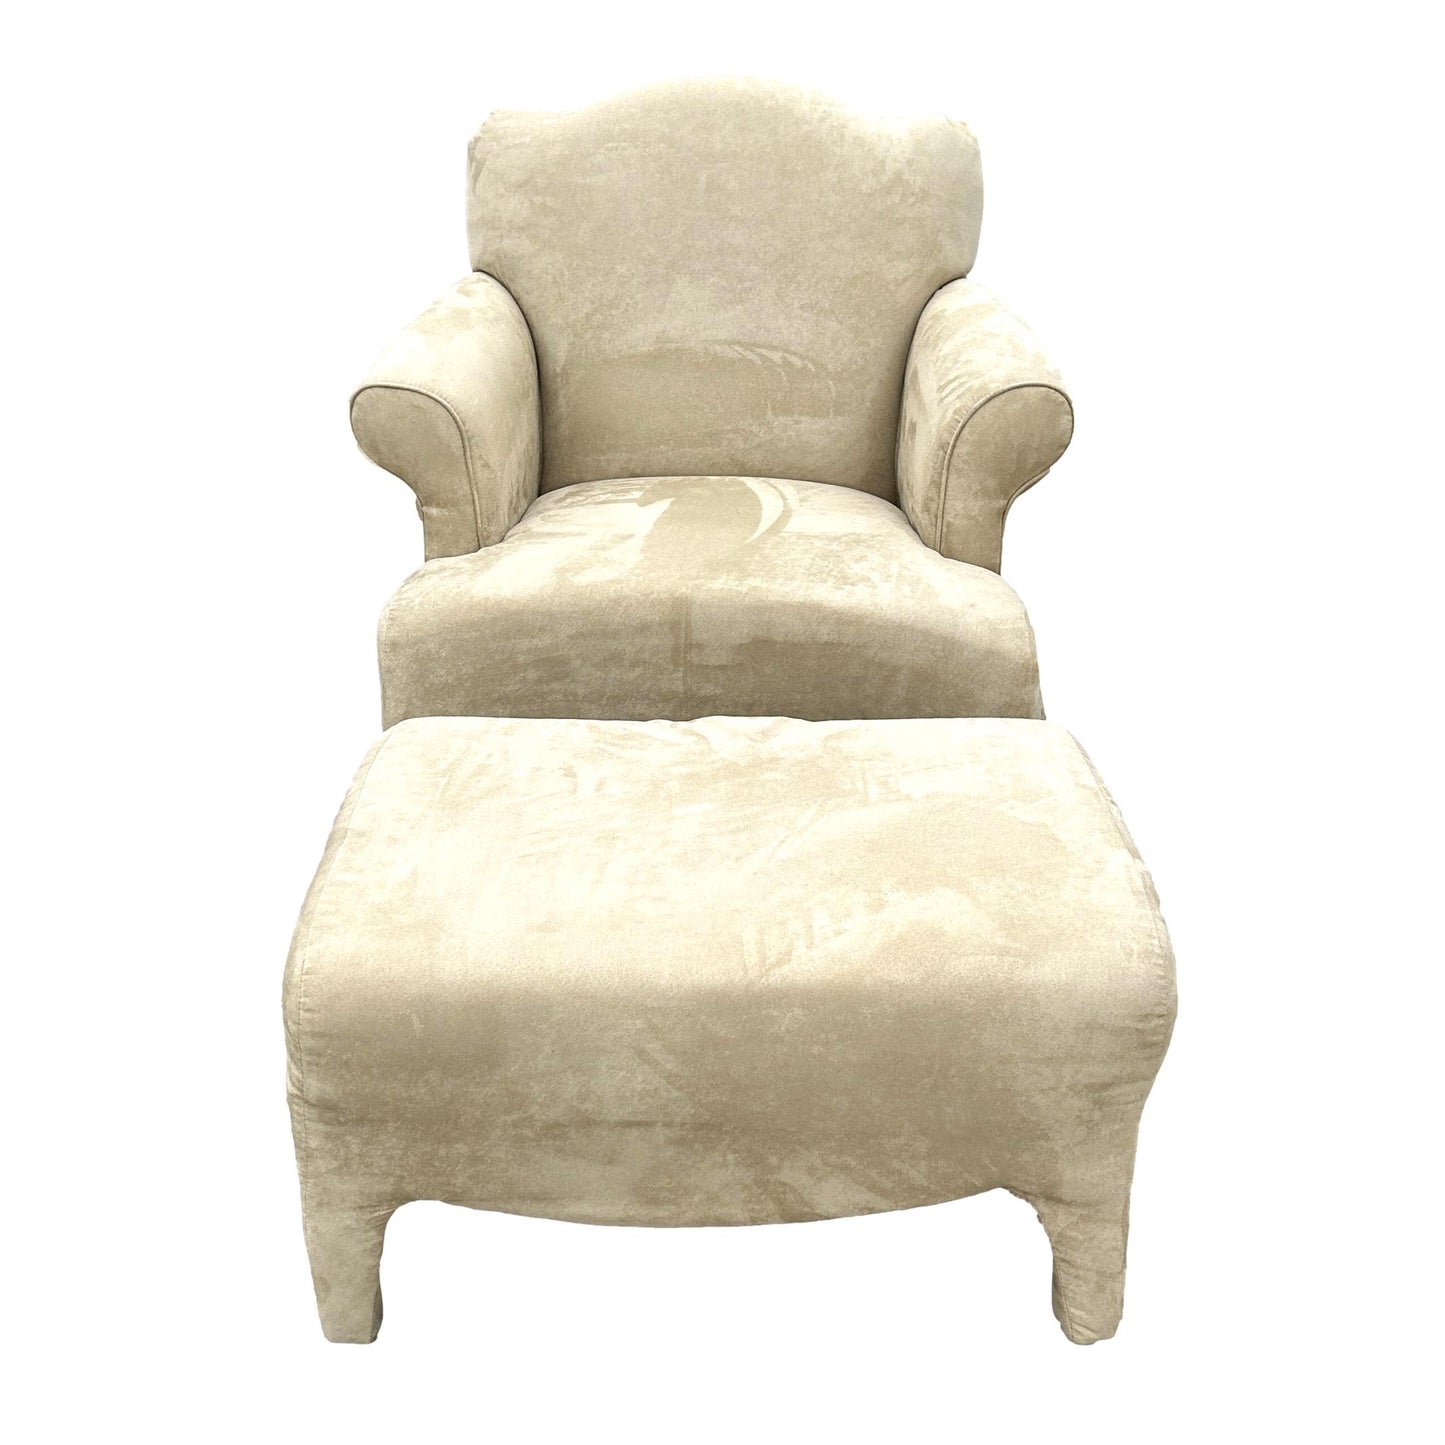 Beige Microfiber Chair and Ottoman